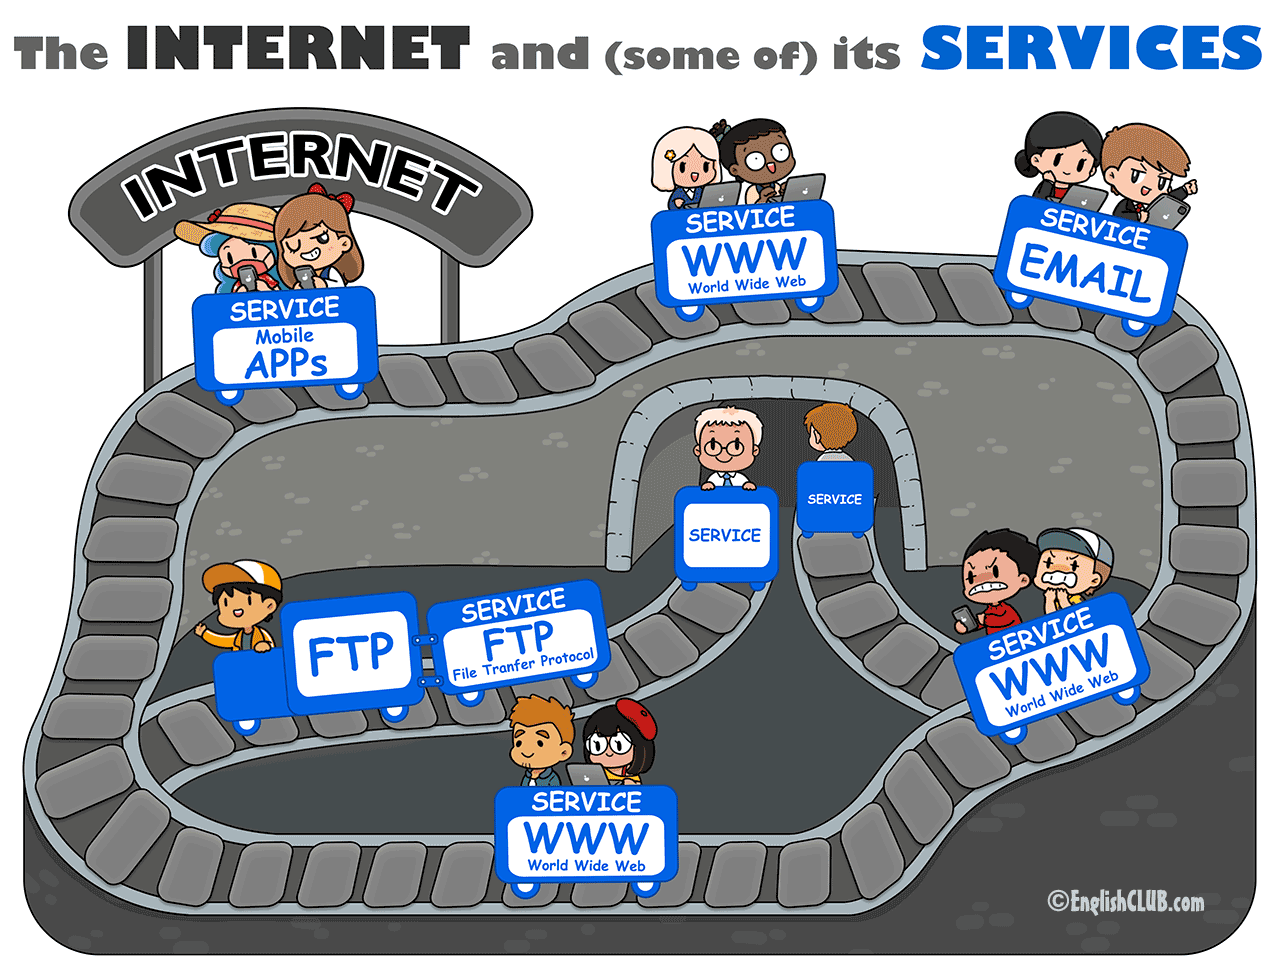 The Internet and some of its Services